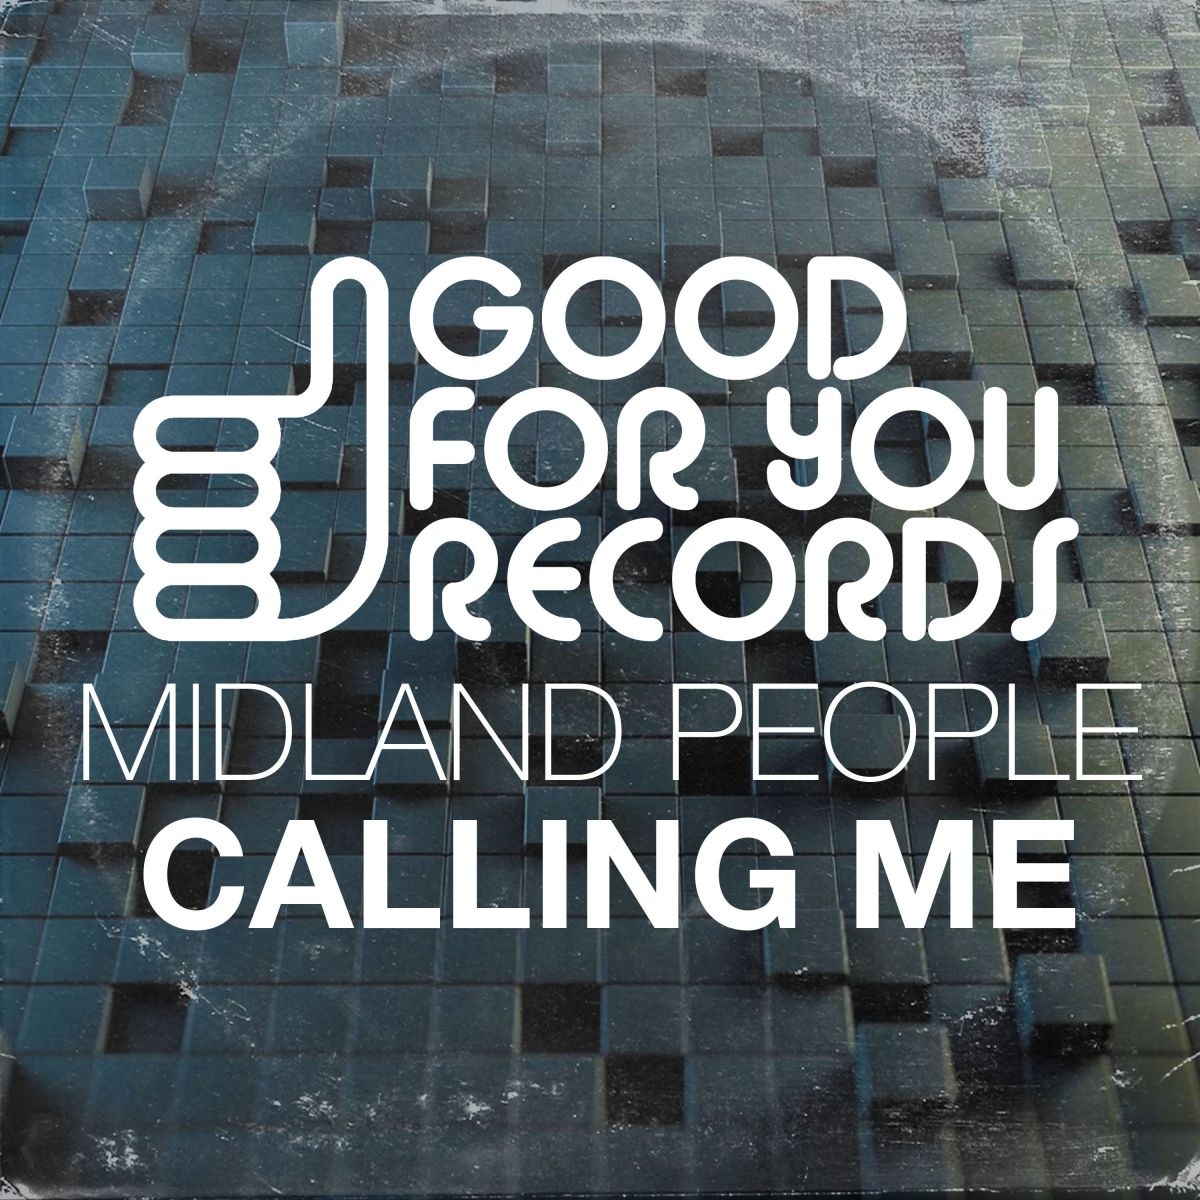 Midland People - Calling Me / Good For You Records